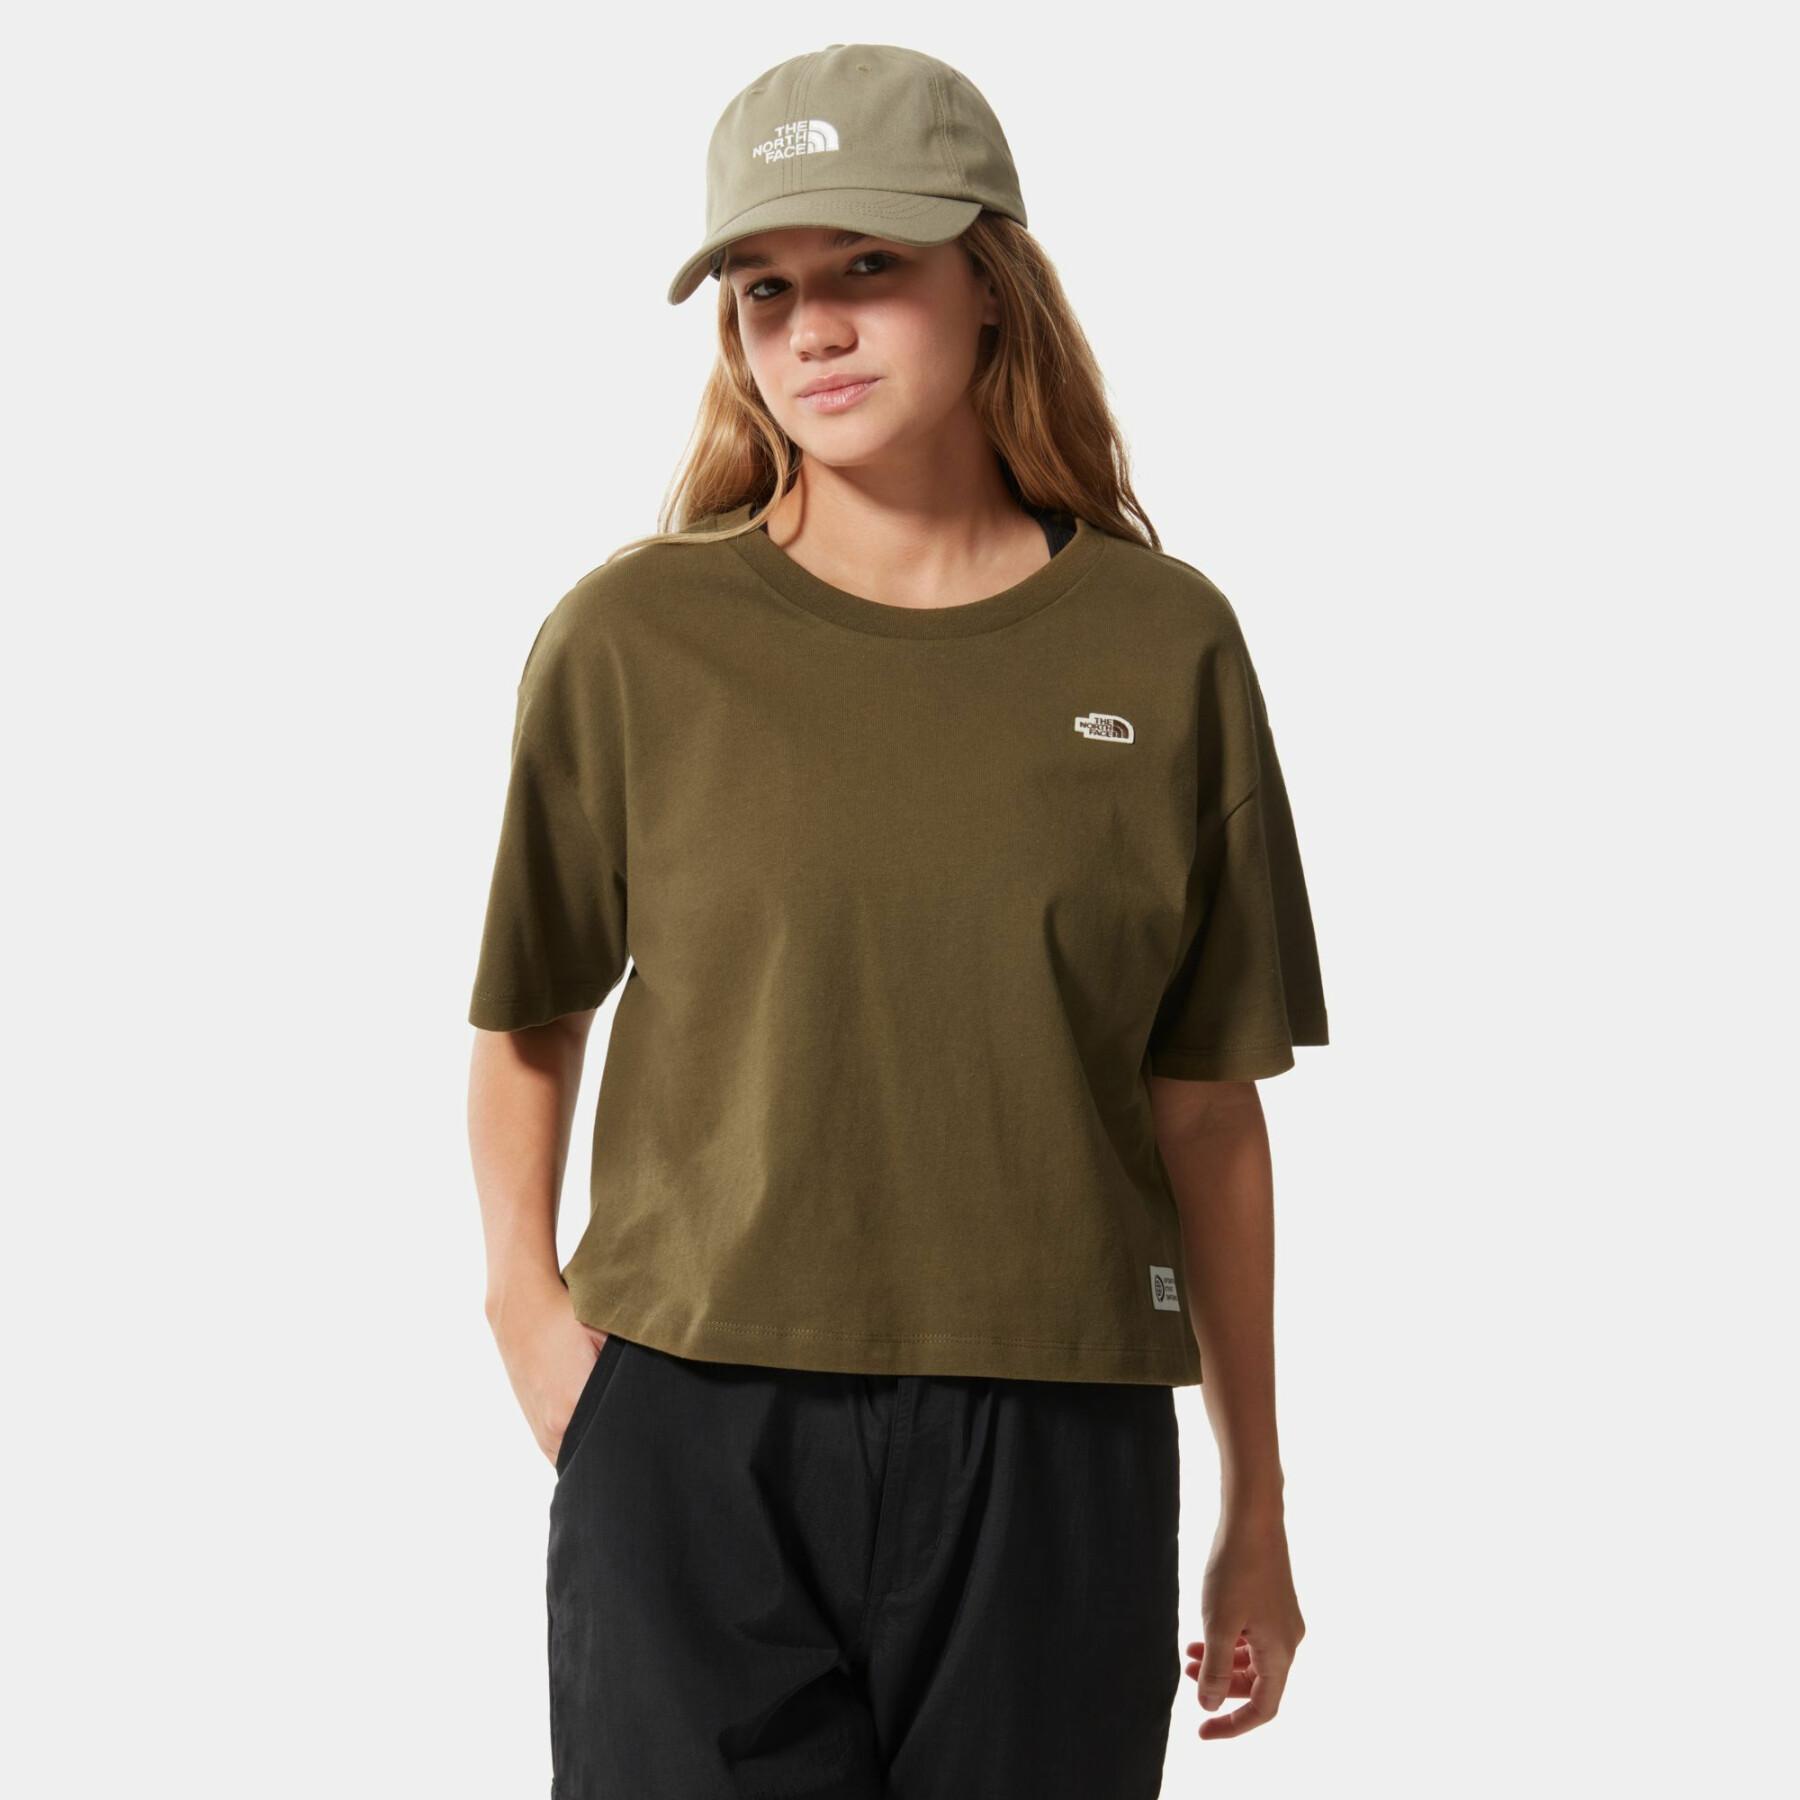 Women's crop top T-shirt The North Face Heritage Recycled